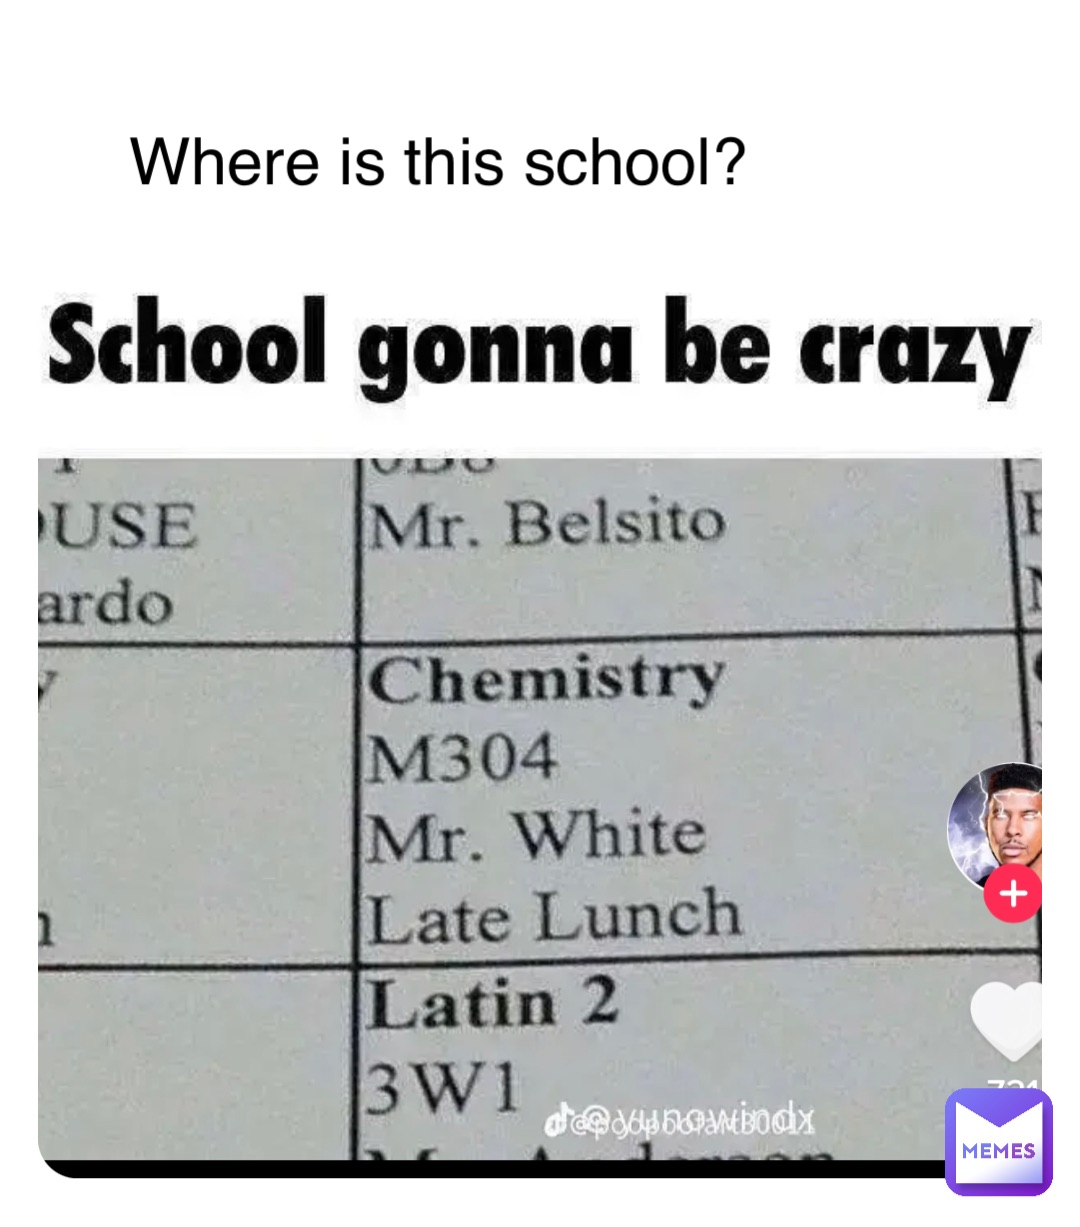 Where is this school?